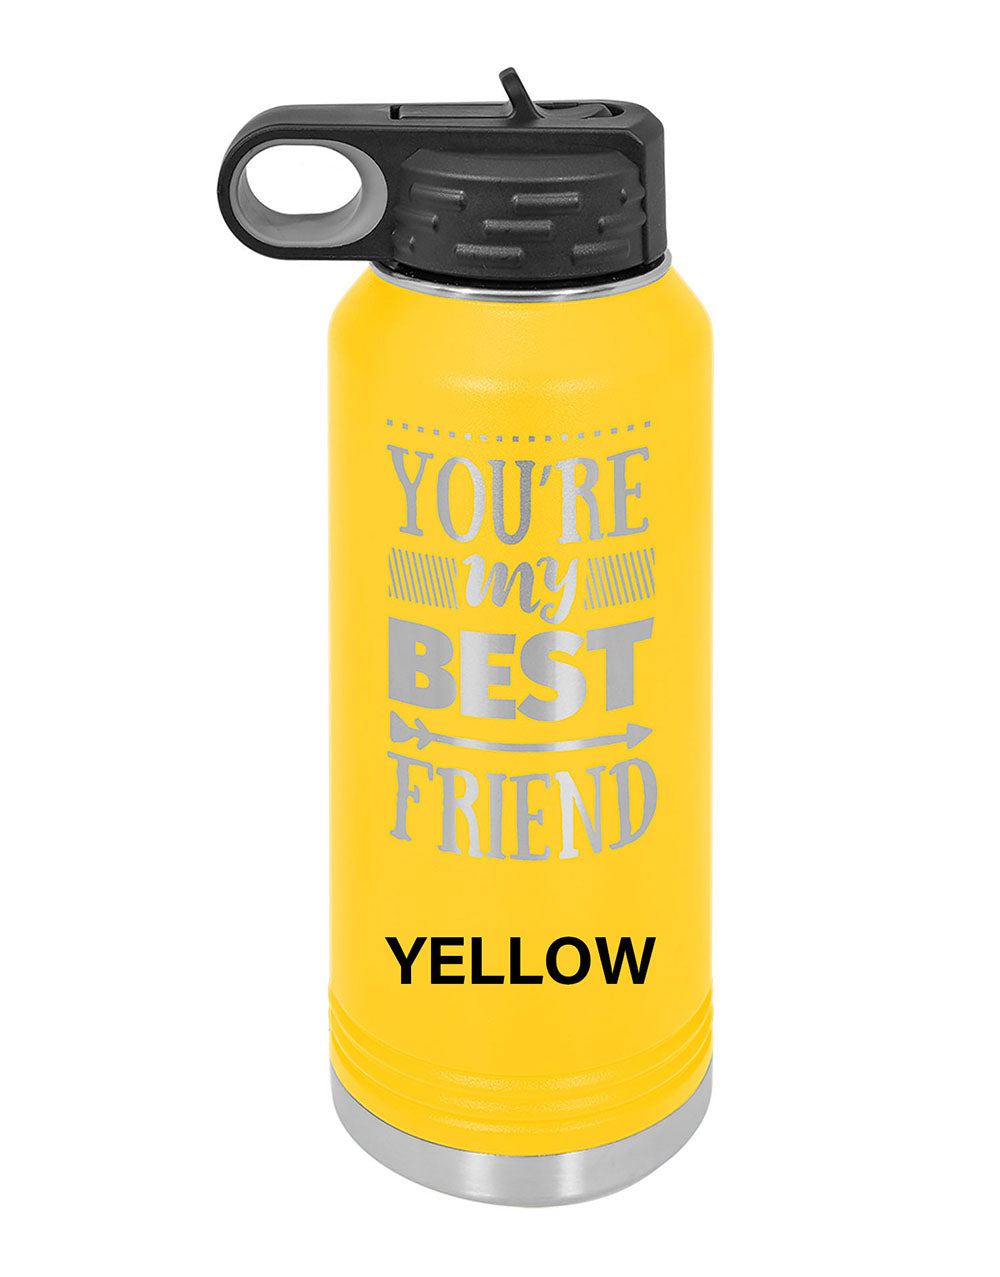 40oz Water Bottle with built-in Straw - Pick your Color - Includes